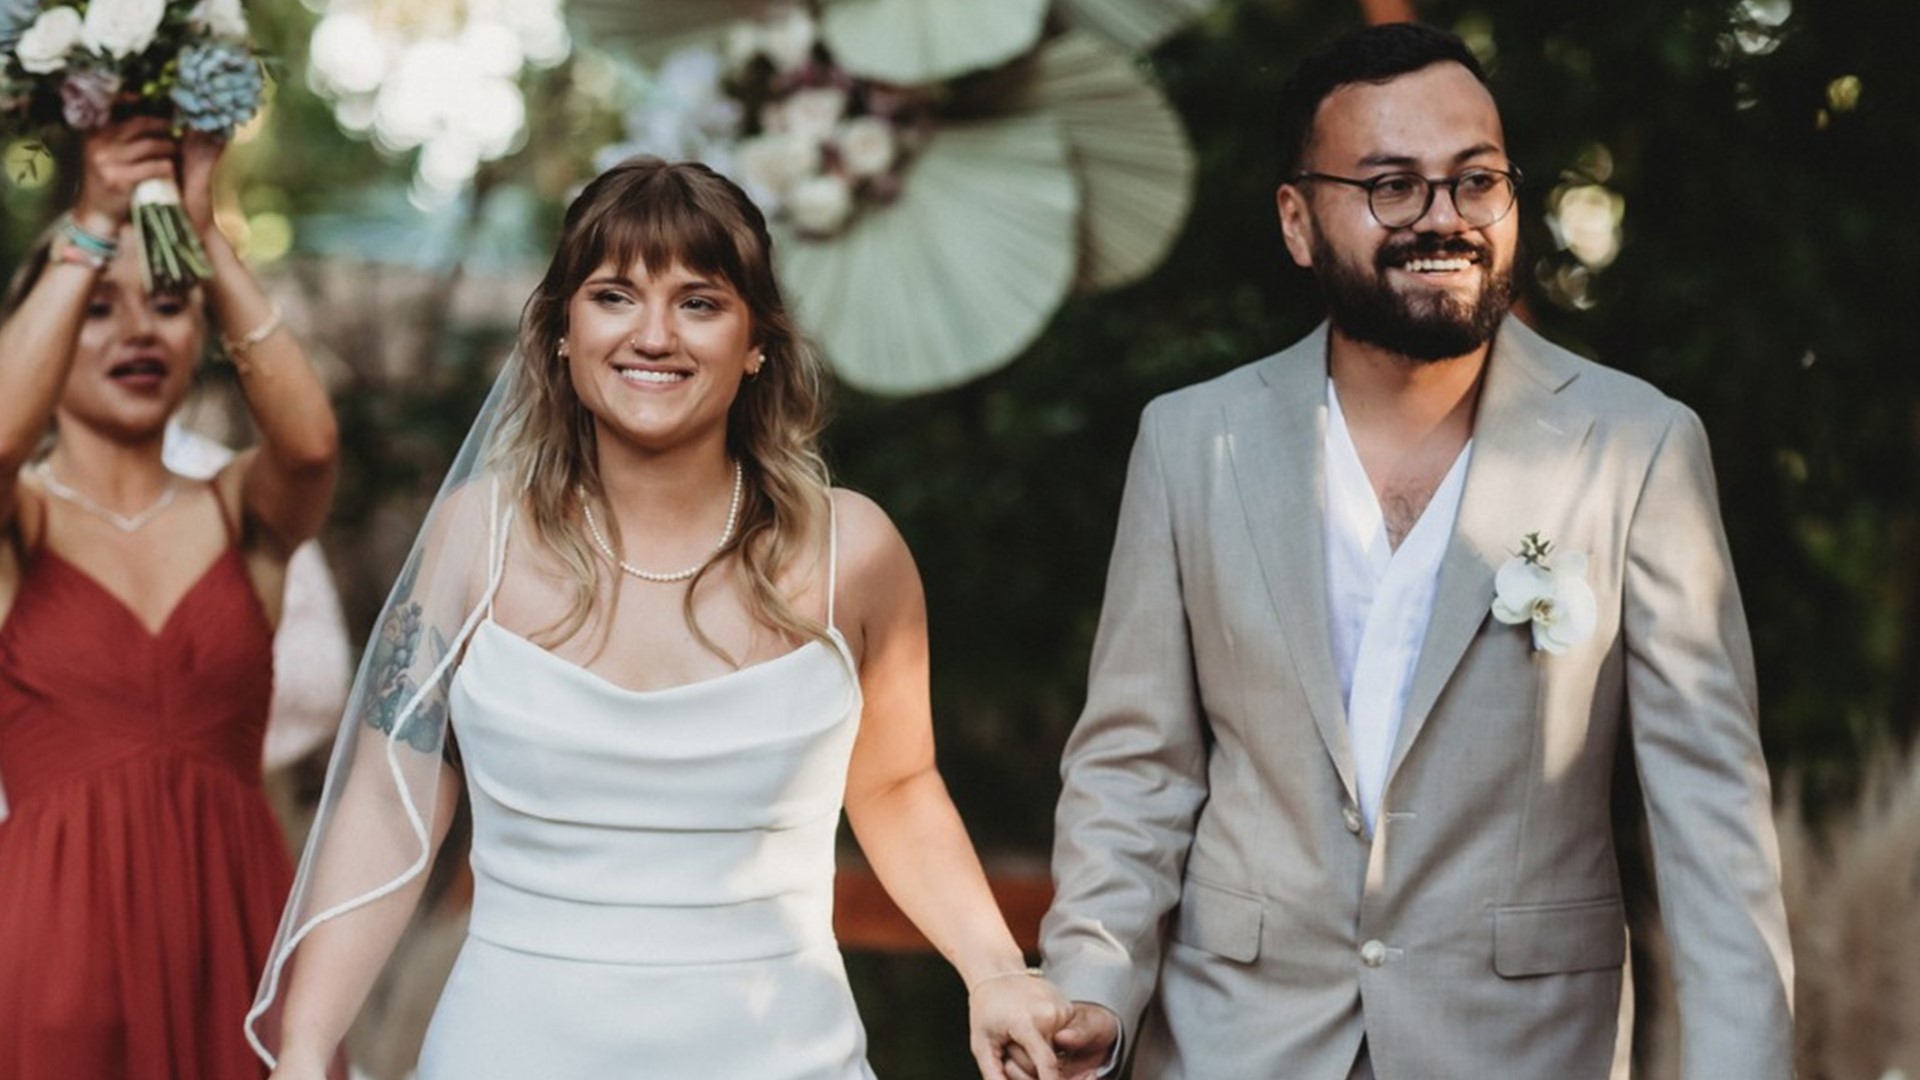 Megan Taylor and Cesar Acosta had a destination wedding in Mexico on Feb. 9. Cesar was detained in Houston on their way back home to Northwest Arkansas.